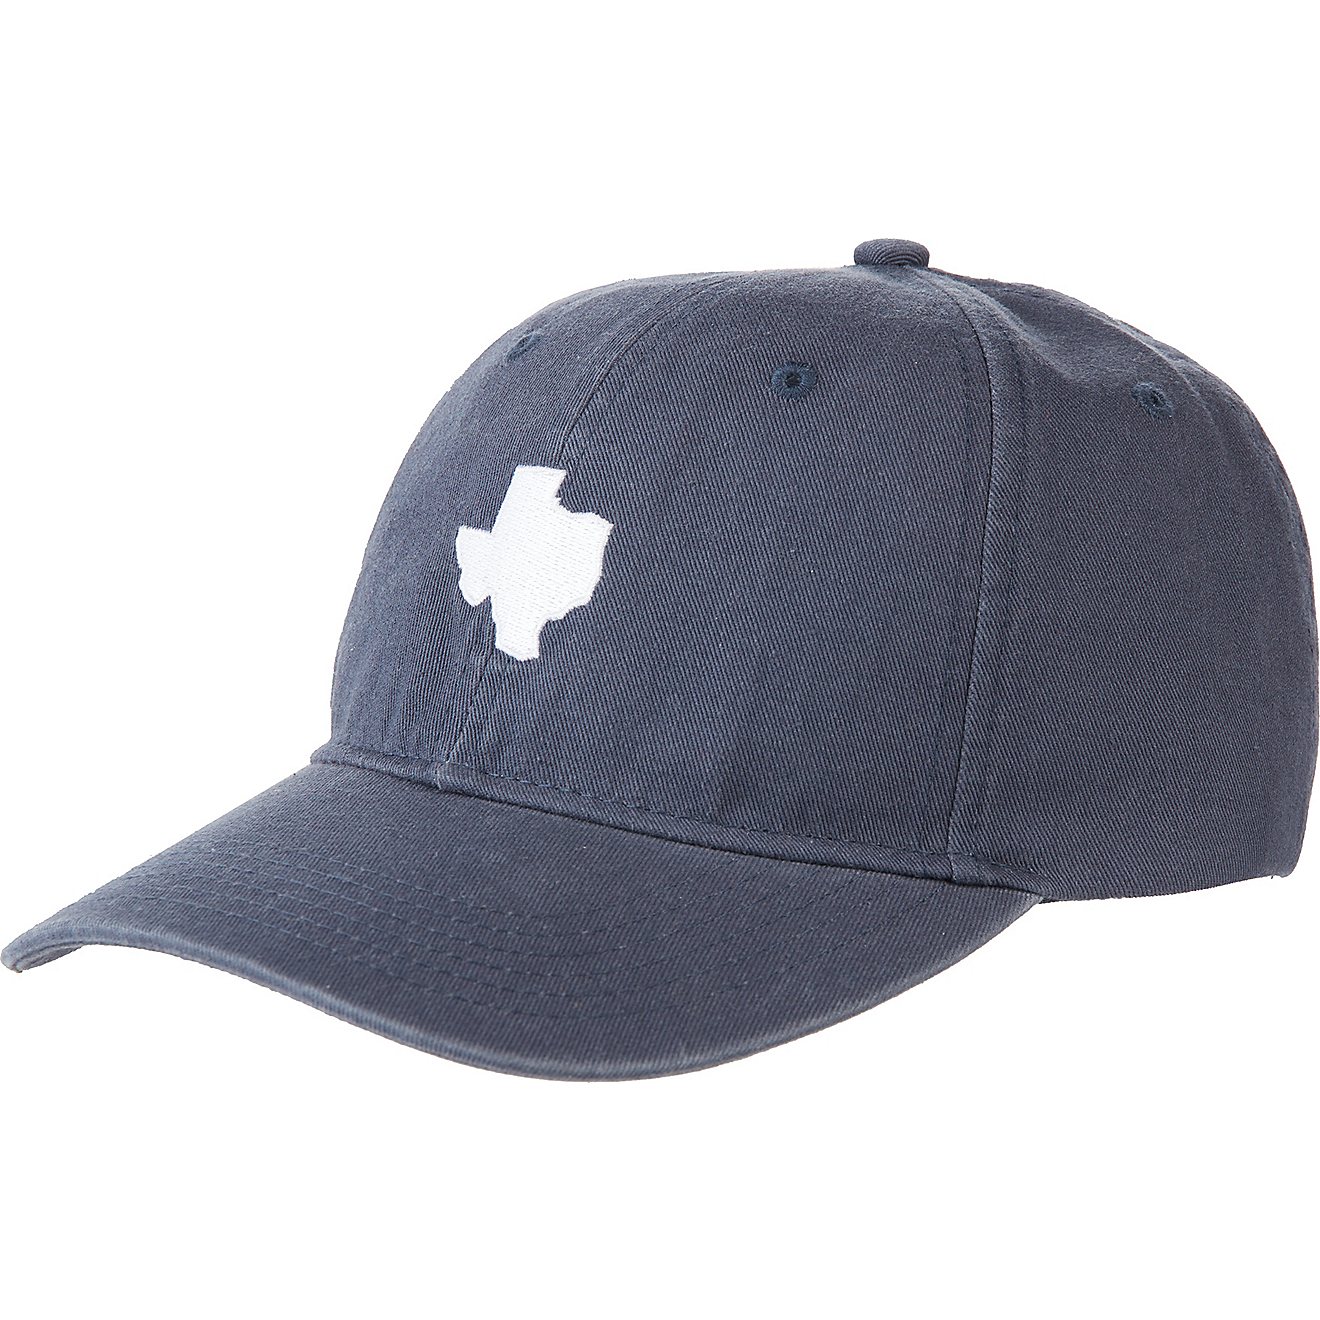 Academy Sports + Outdoors Men's Texas State Outline Cap                                                                          - view number 1